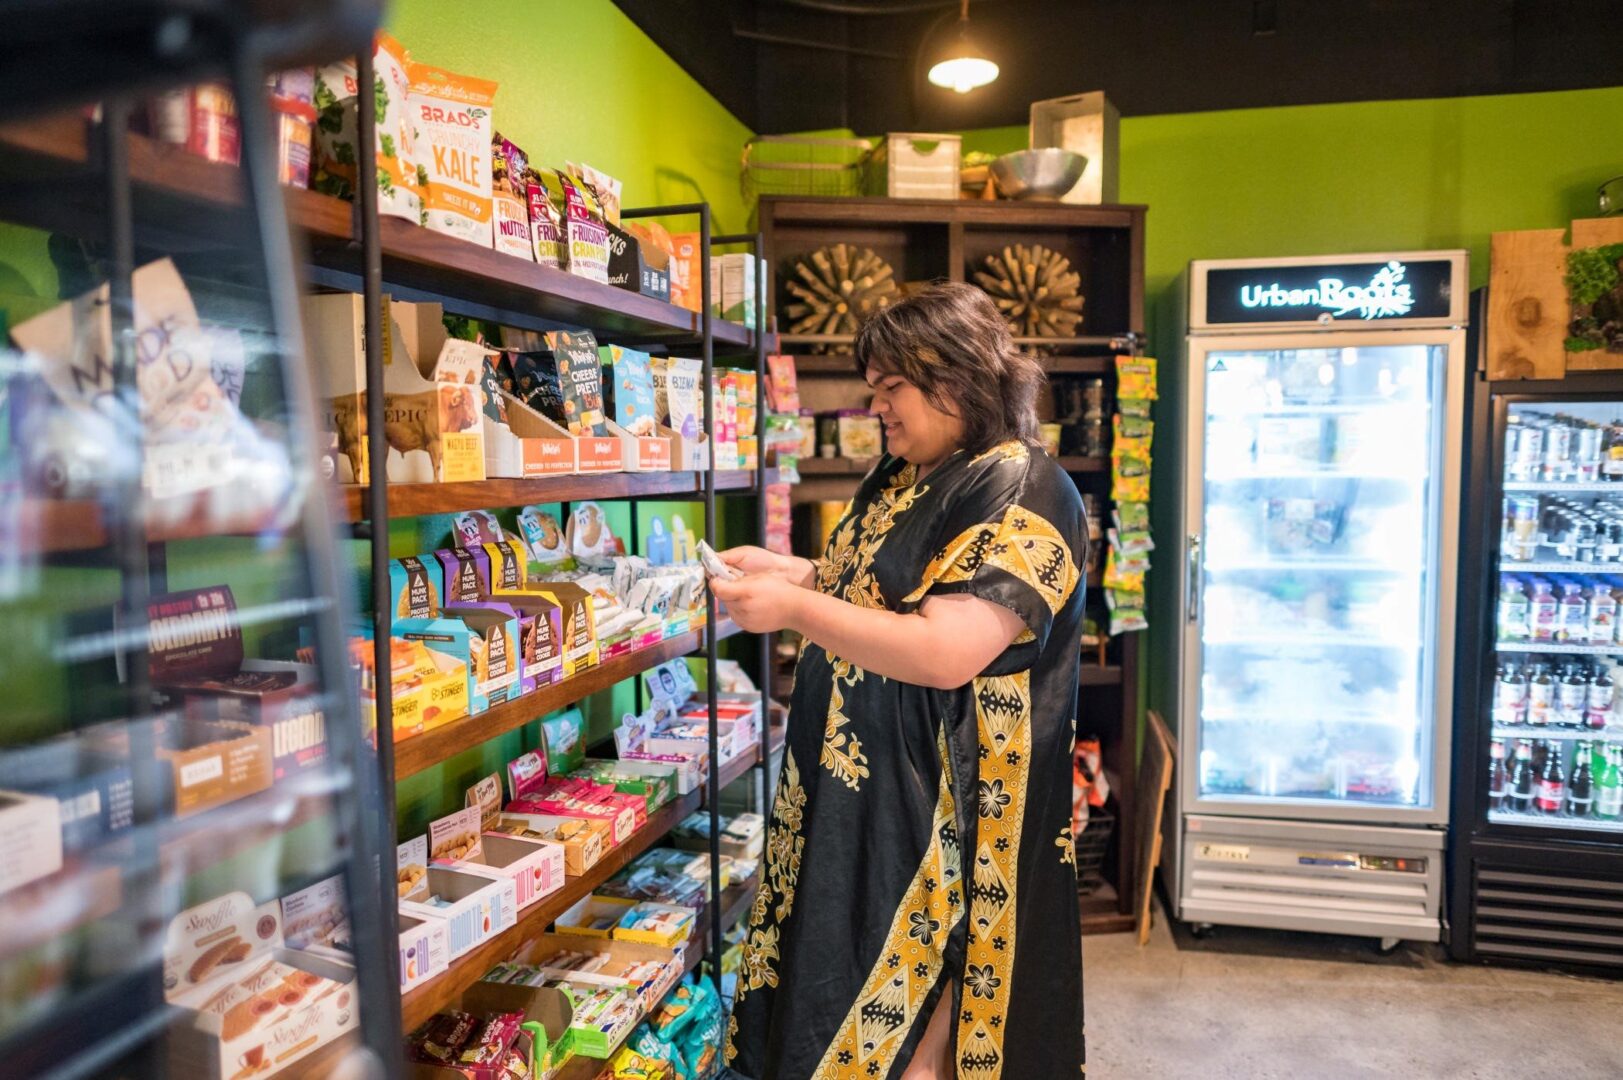 Emilio Ceja Guzman stands in front of a display of snacks inside a small market that sells organic, paleo, vegan, and other healthy foods. 